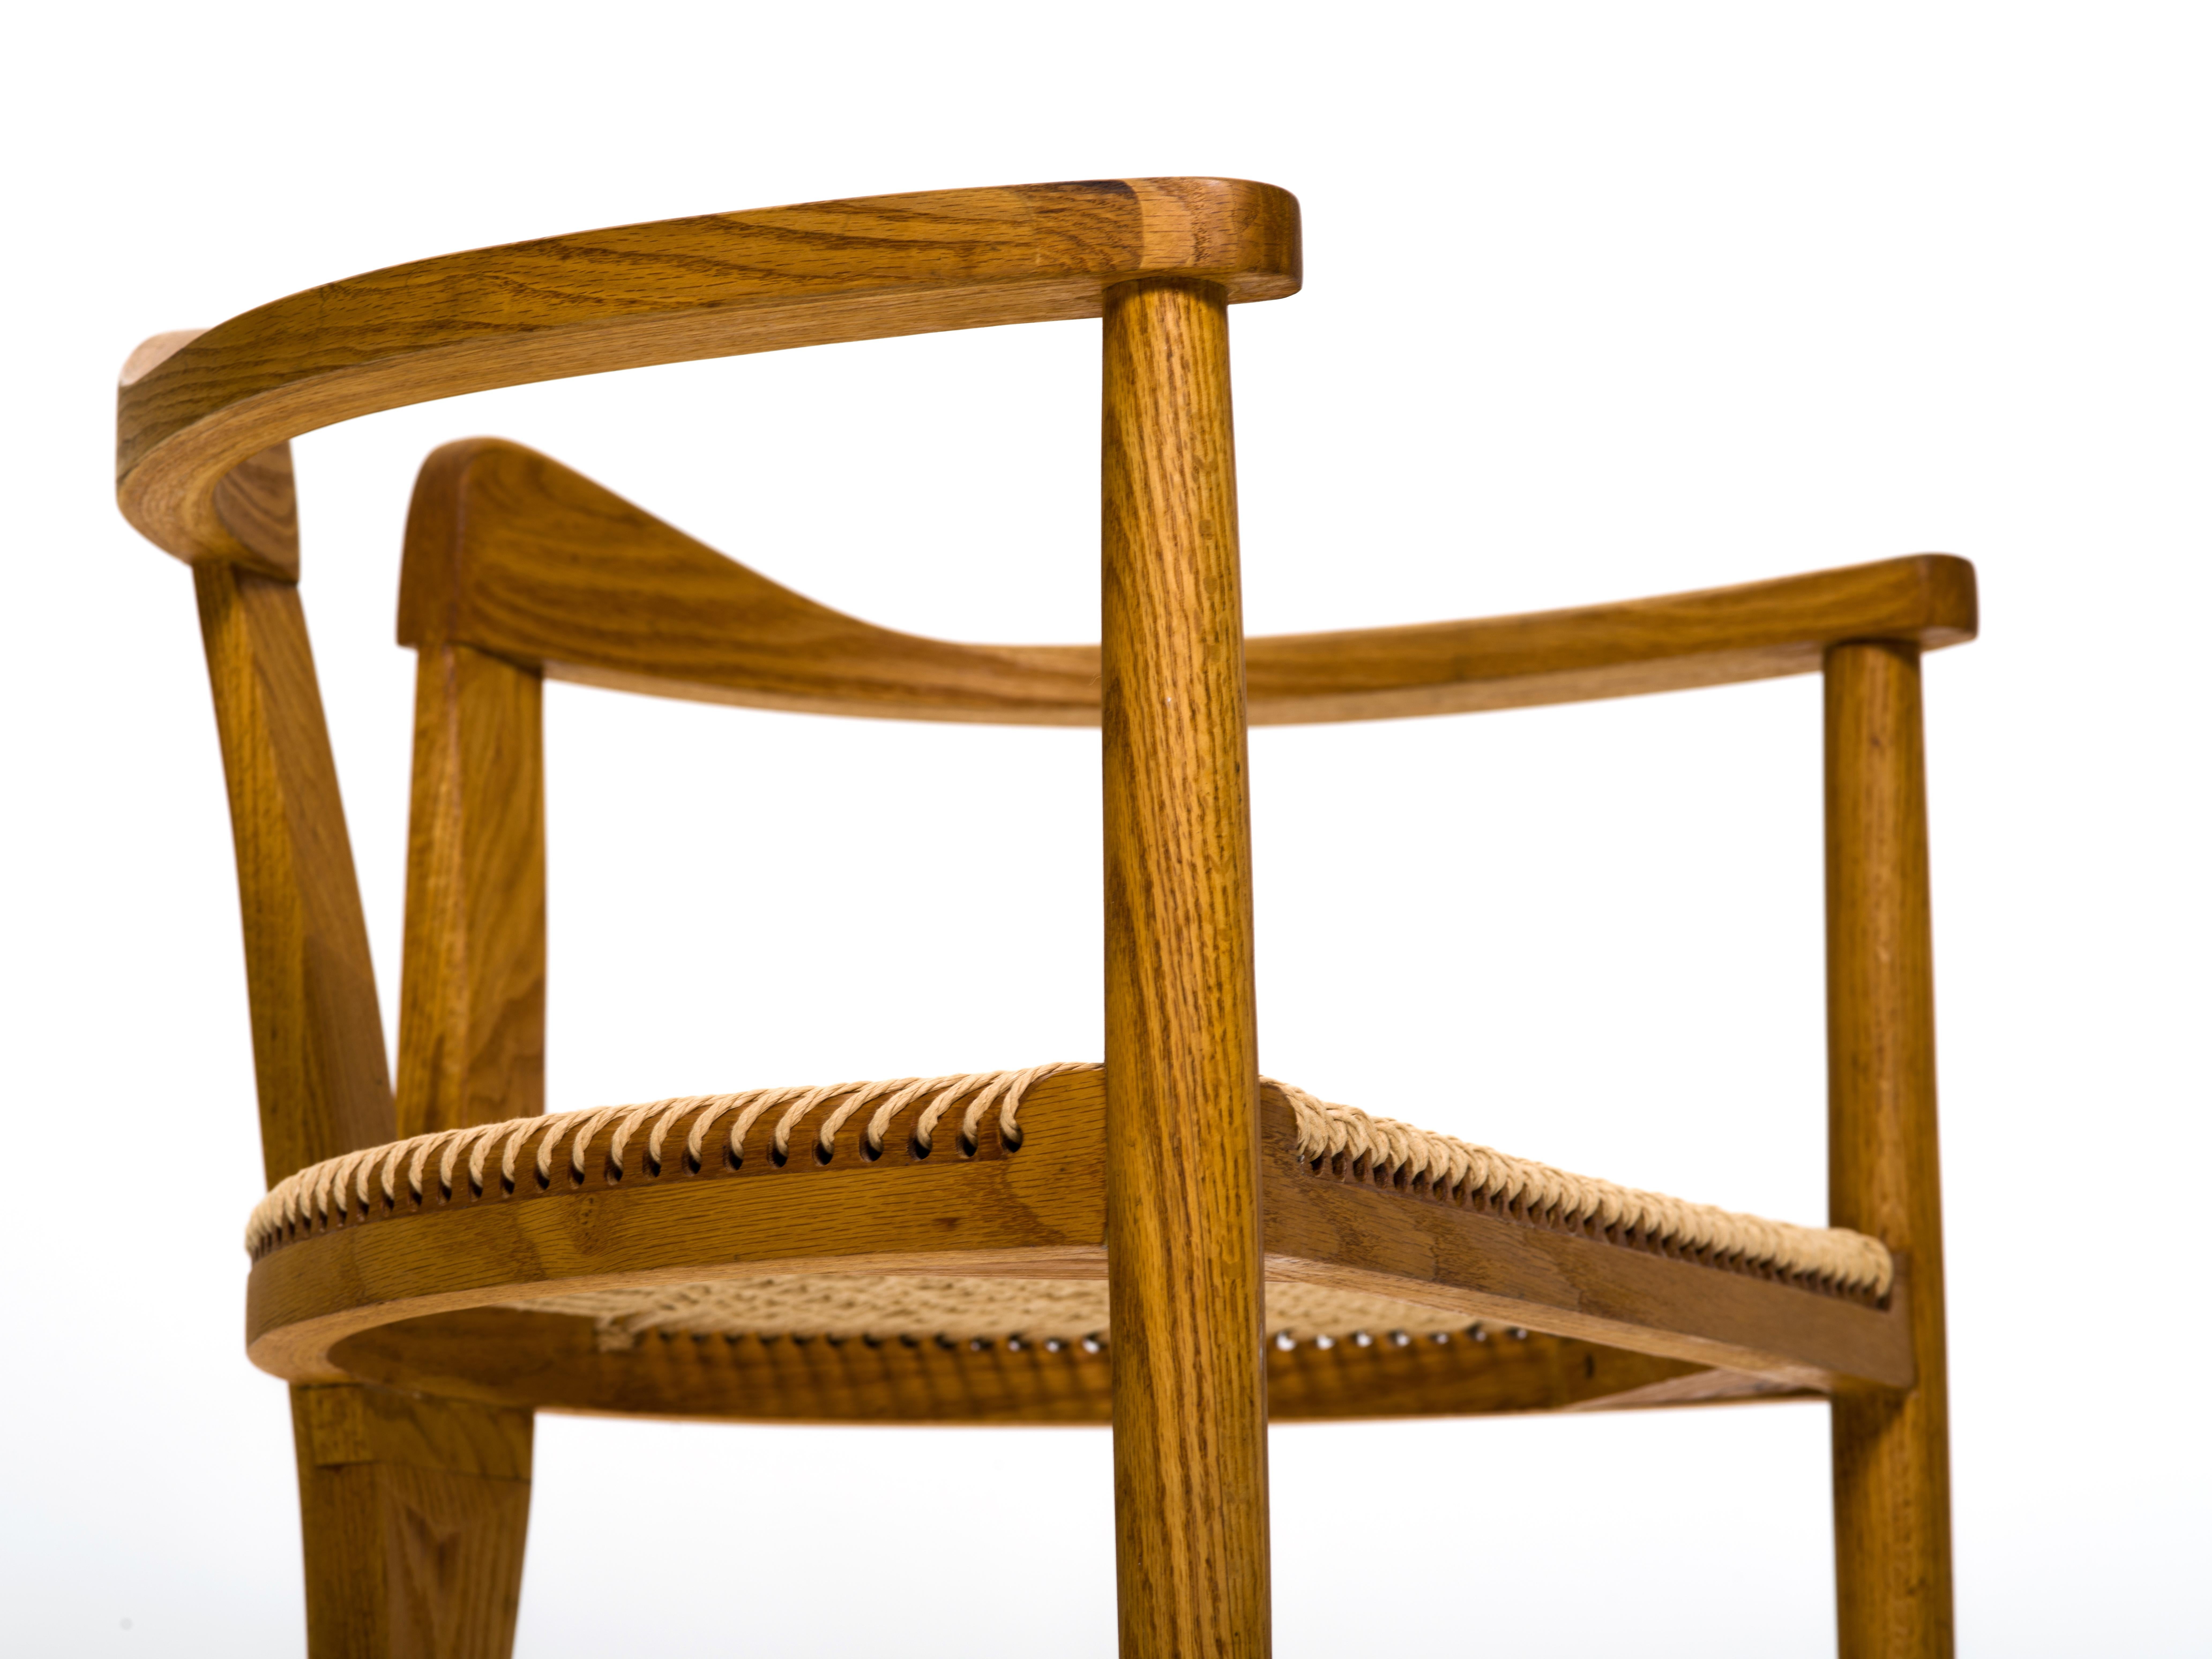 Papercord American Studio Craft Tri-Leg Chair in Oak with Woven Seat after Hans Wegner